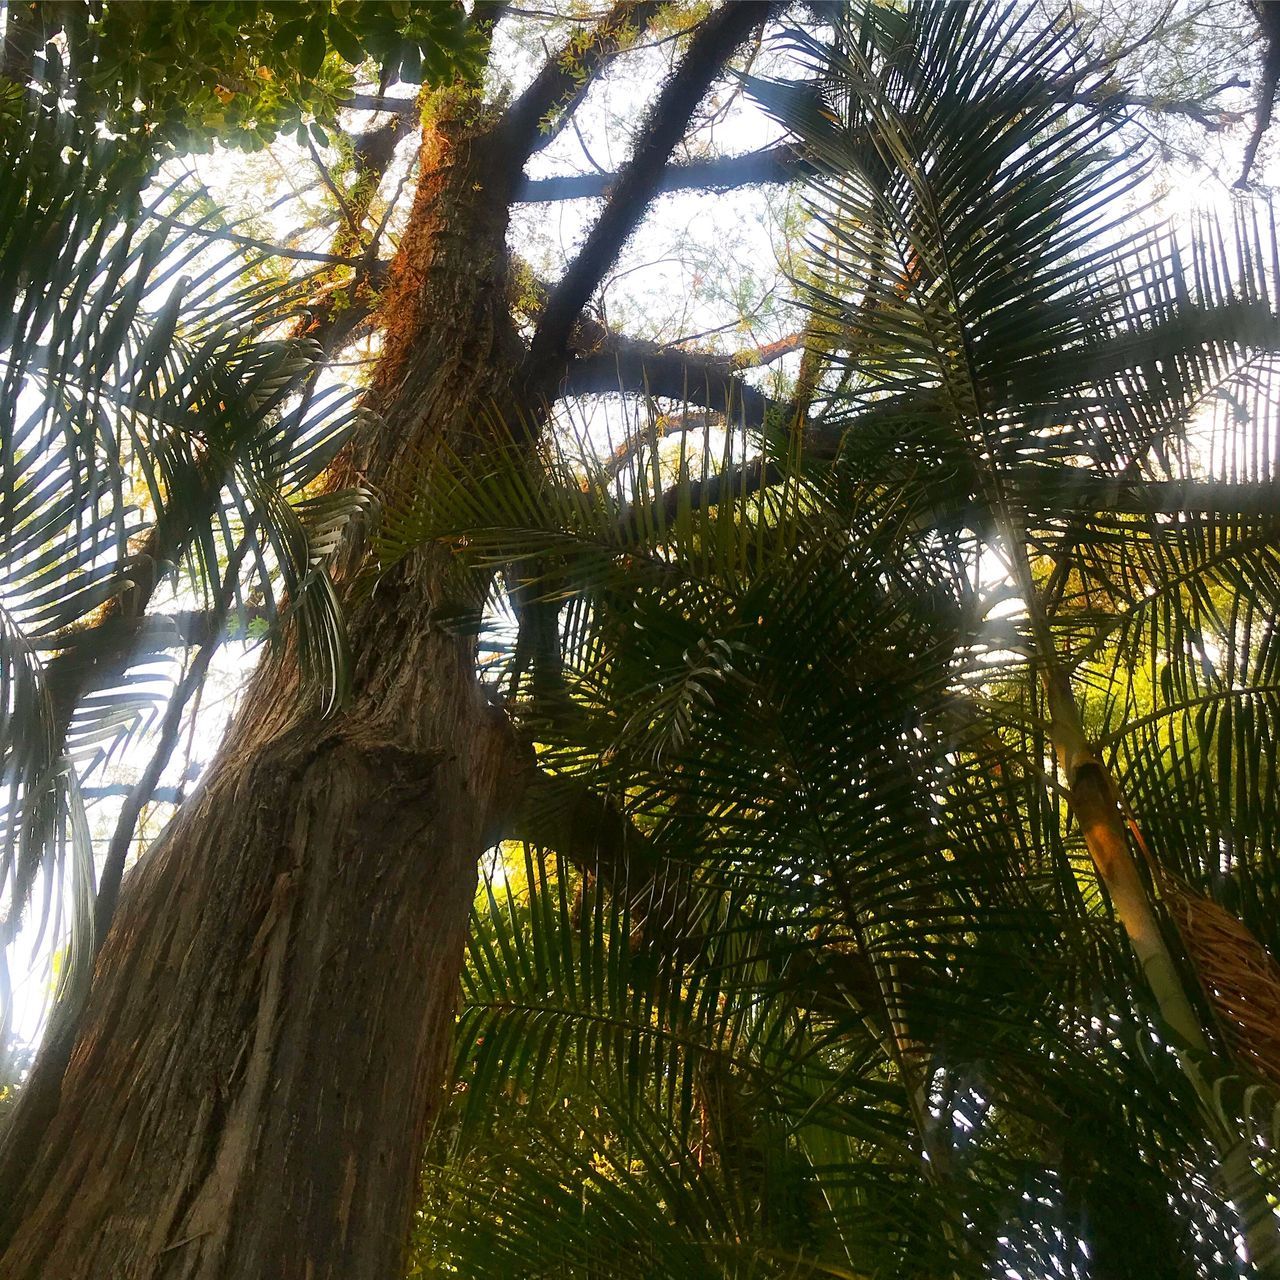 tree, growth, low angle view, tree trunk, nature, palm tree, outdoors, day, no people, beauty in nature, tranquility, green color, branch, sky, close-up